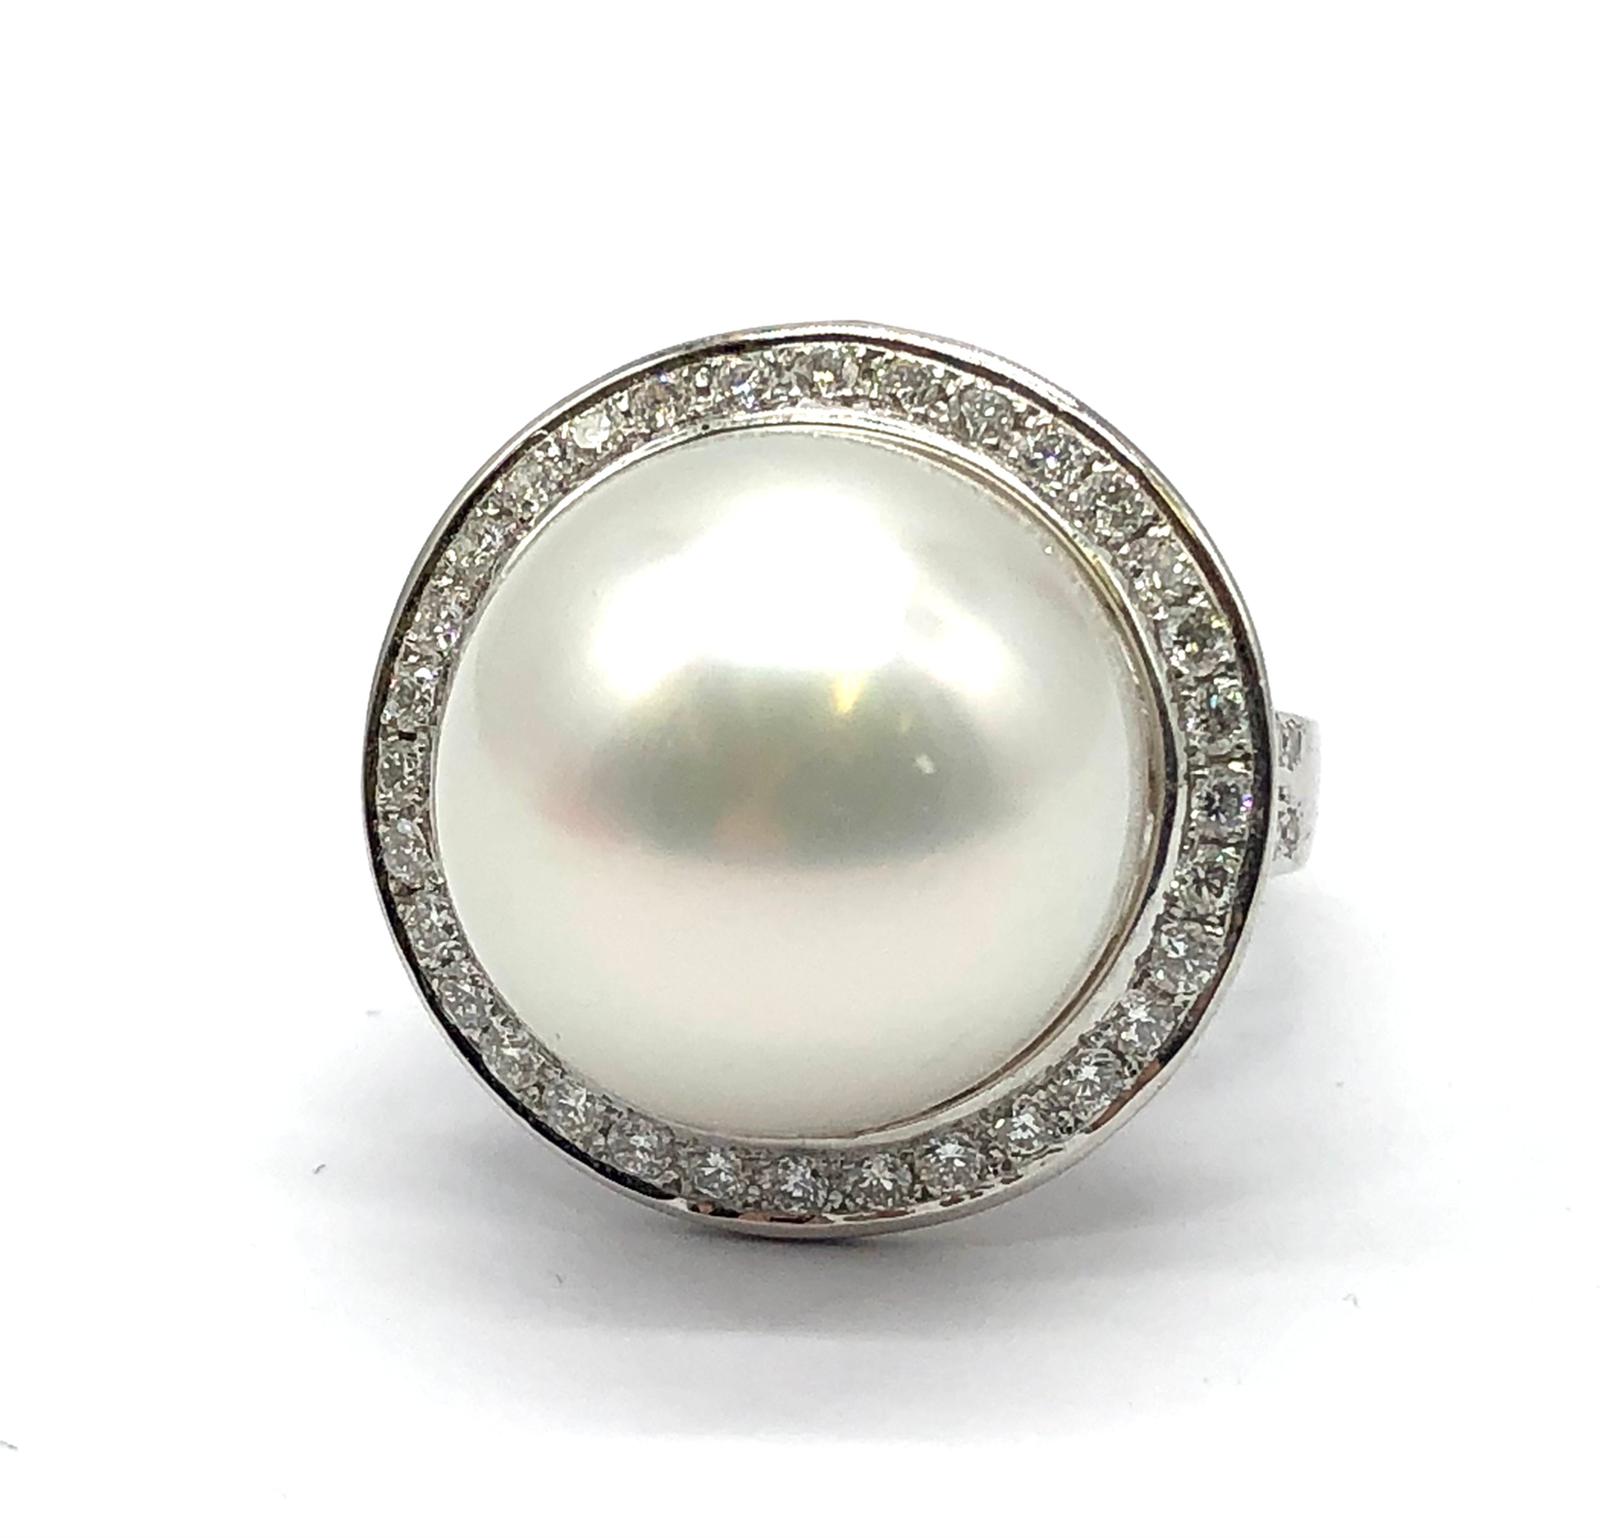 A large Kimoto pearl (17mm diameter) ring set in diamond and 18ct white gold ring, weight 14.43g and - Image 3 of 13